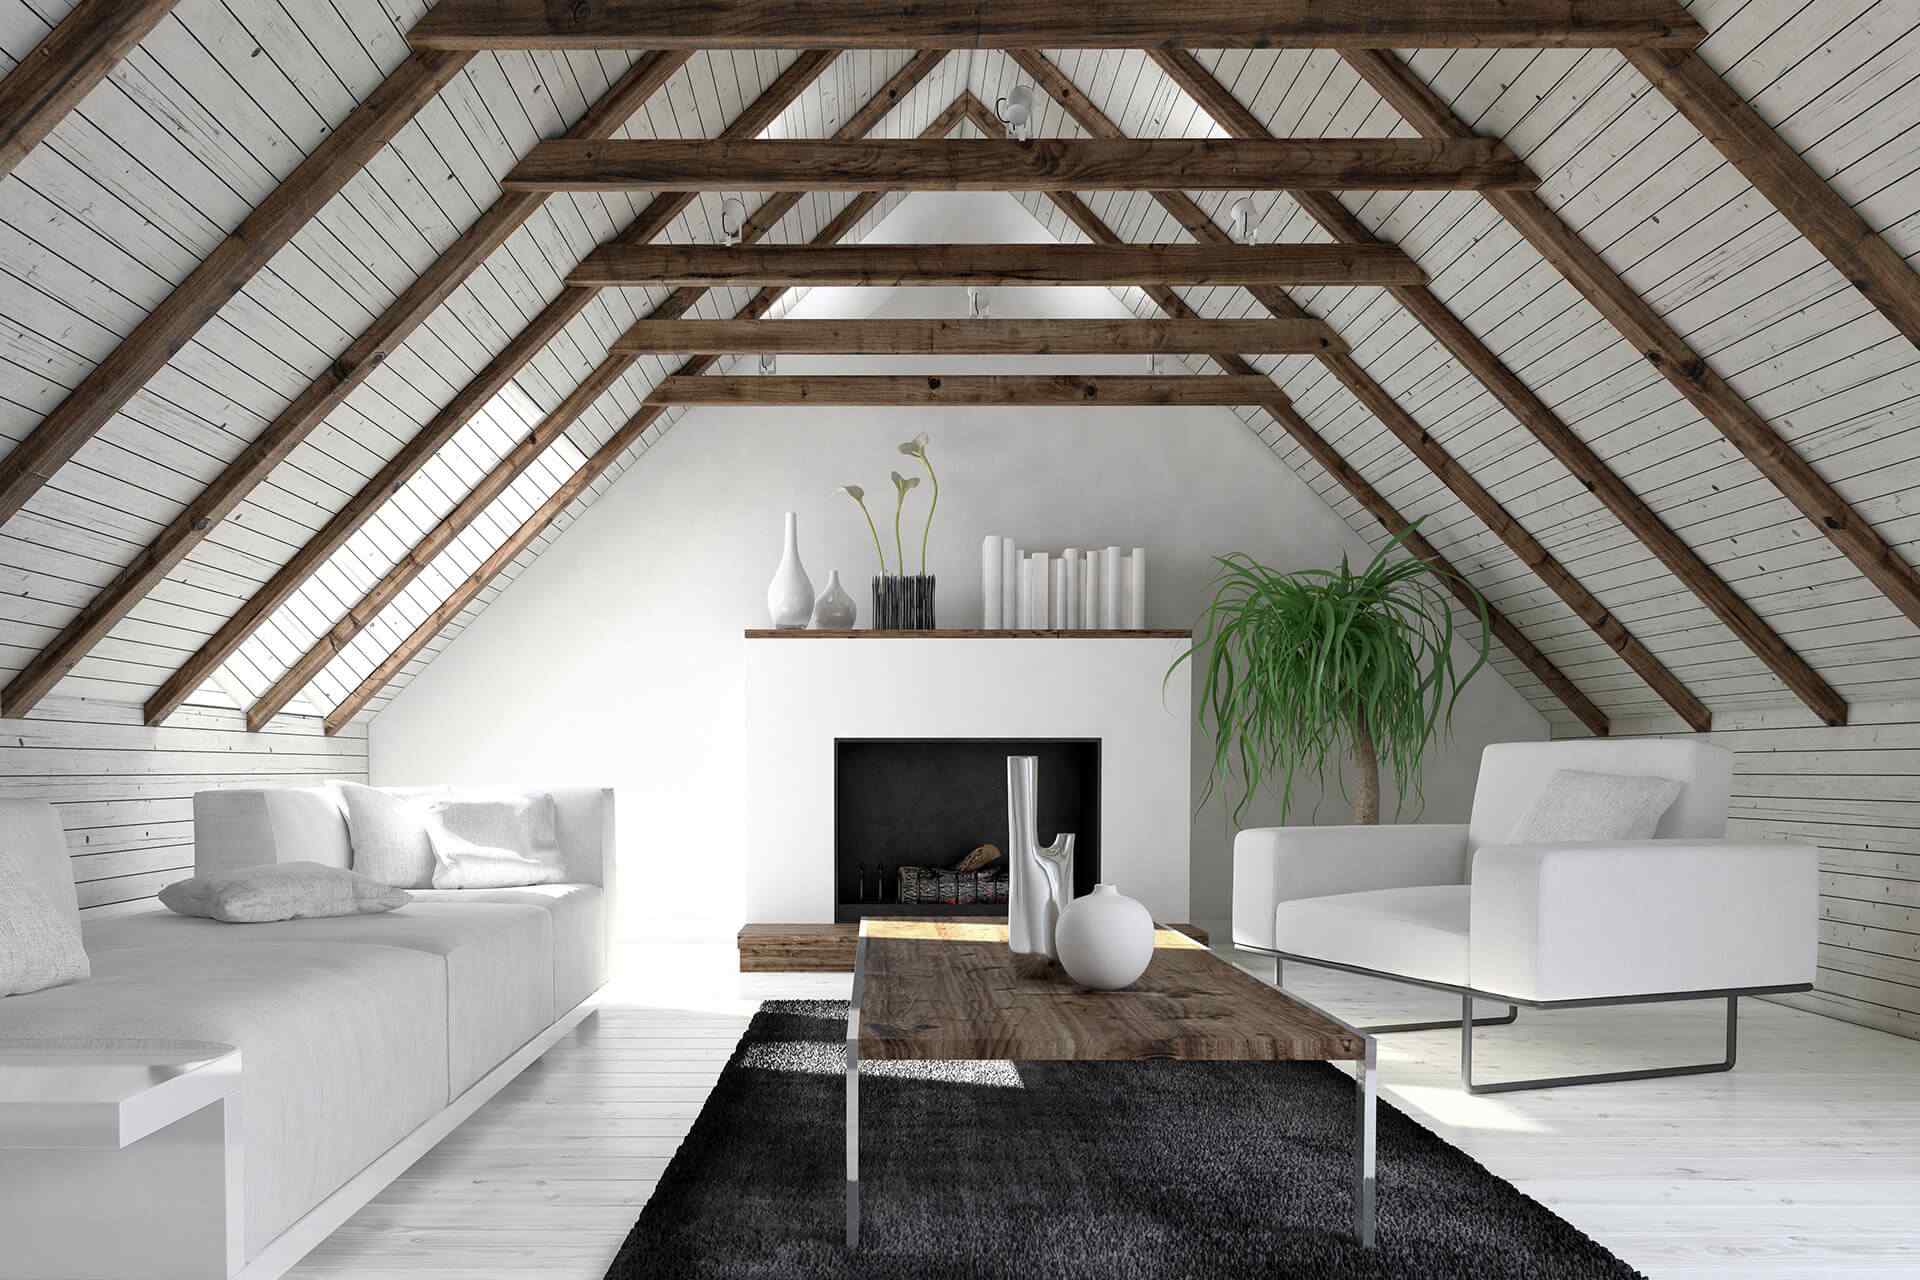 Modern interior living space with a vaulted ceiling.